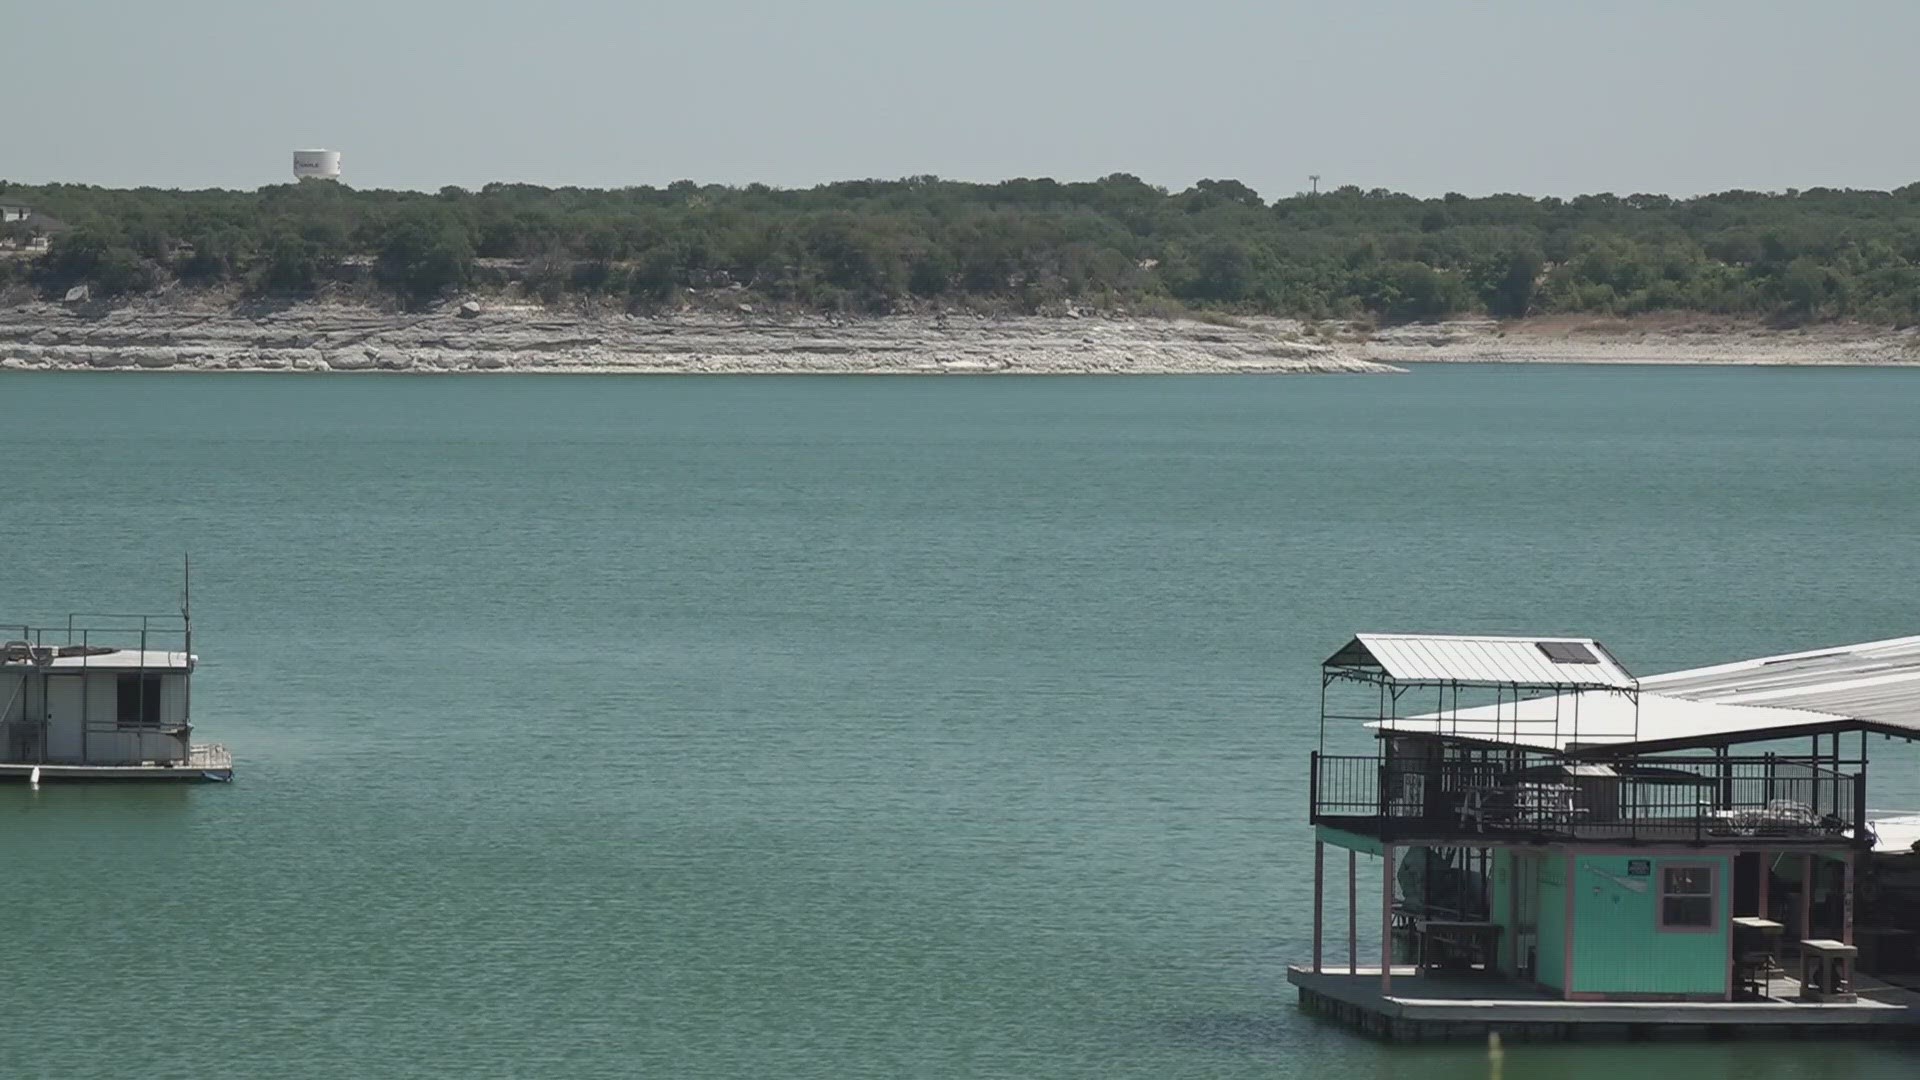 Lake Belton's elevation is the lowest its been since the 1970's